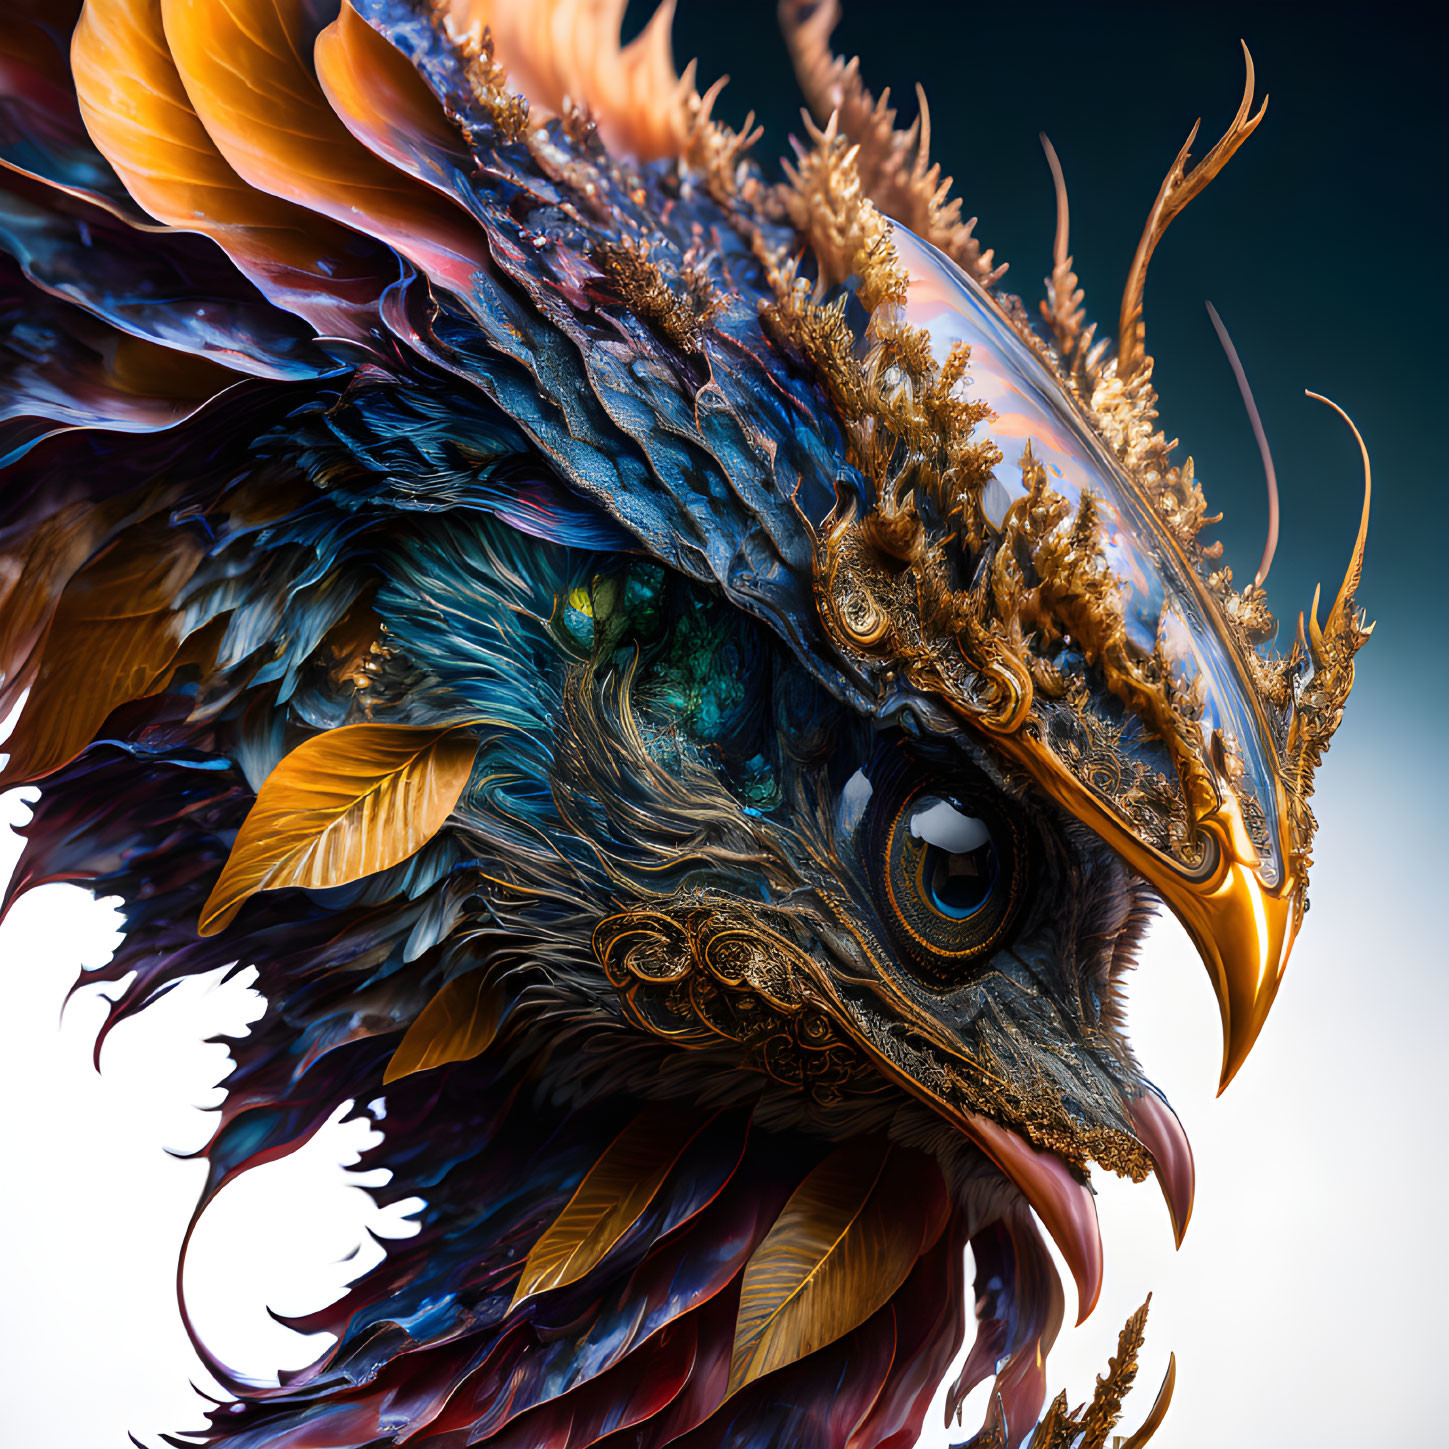 Detailed Orange and Blue Feathered Creature with Golden Decorations